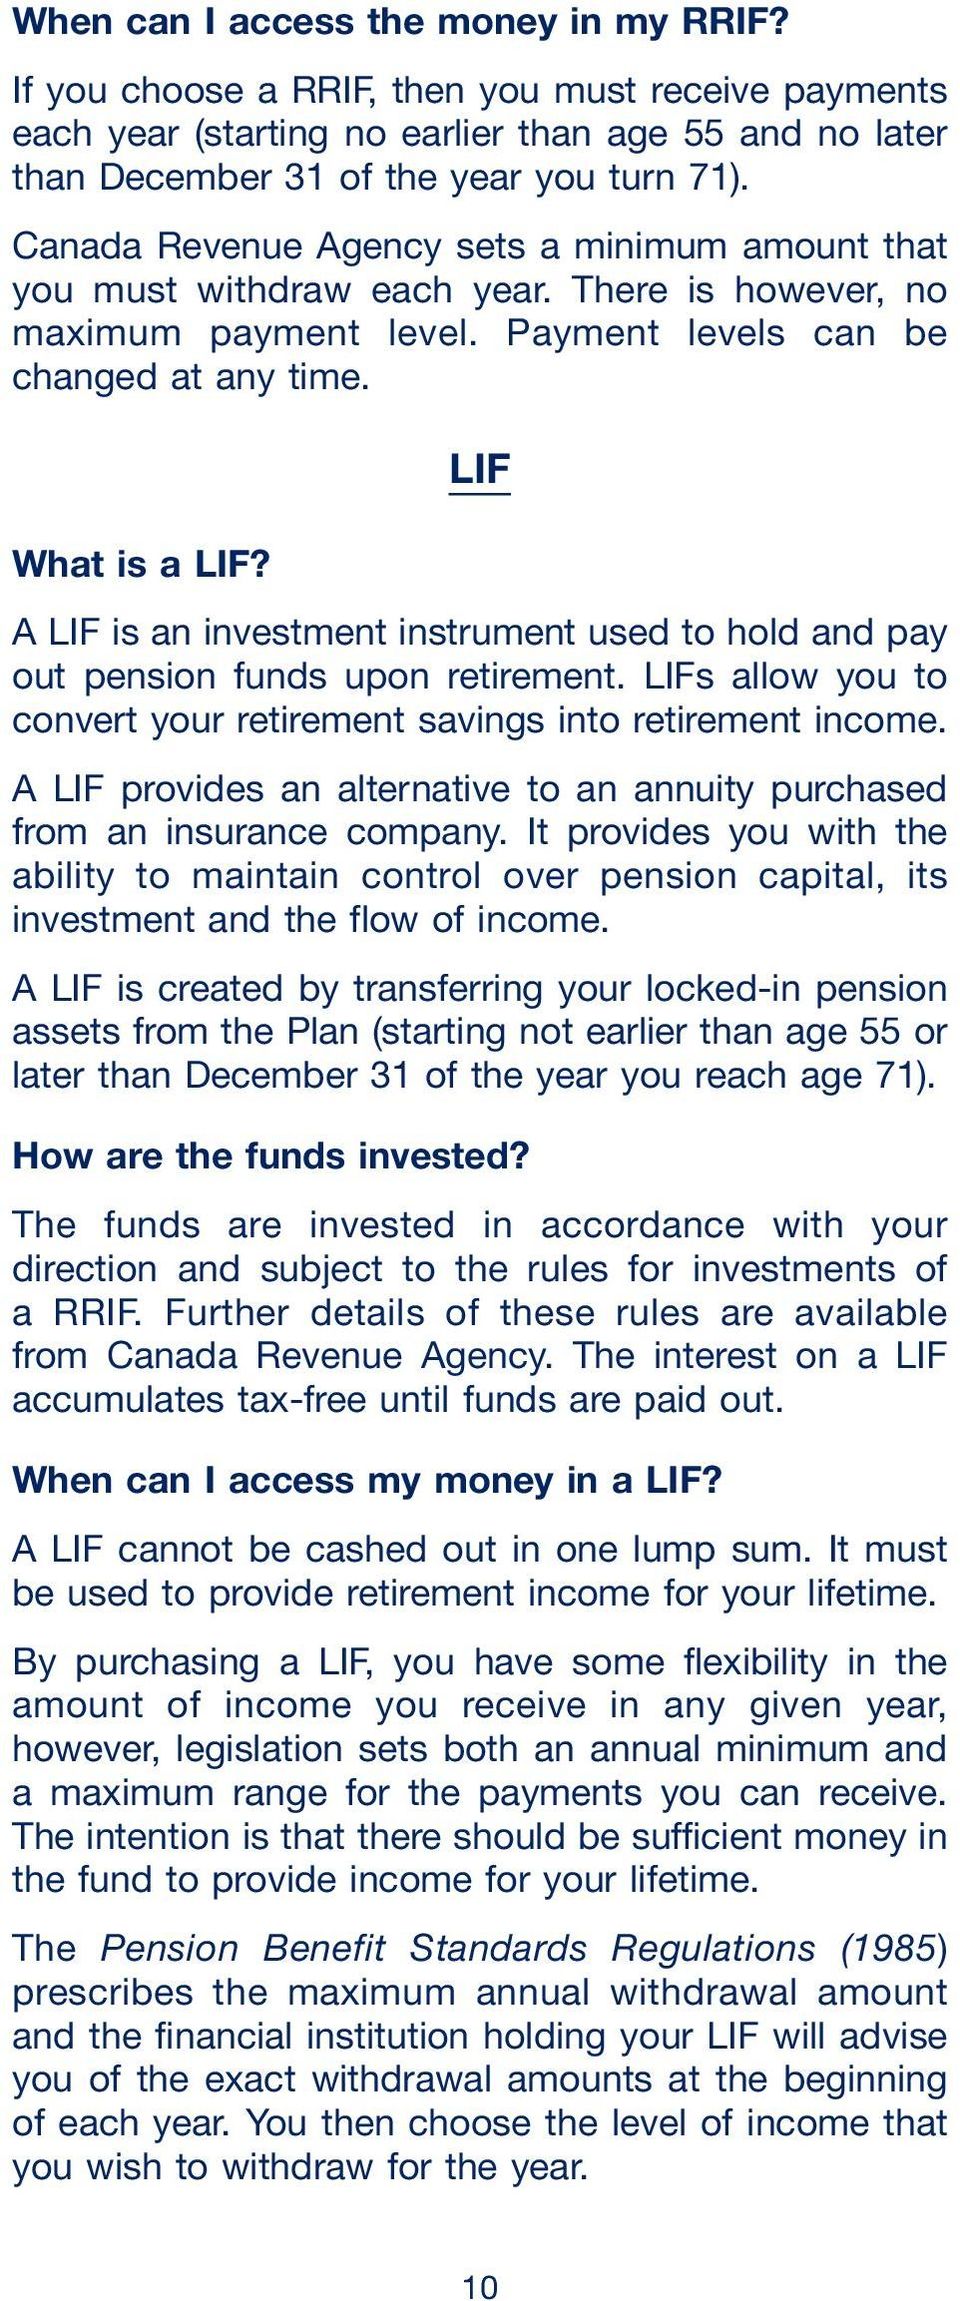 A LIF is an investment instrument used to hold and pay out pension funds upon retirement. LIFs allow you to convert your retirement savings into retirement income.